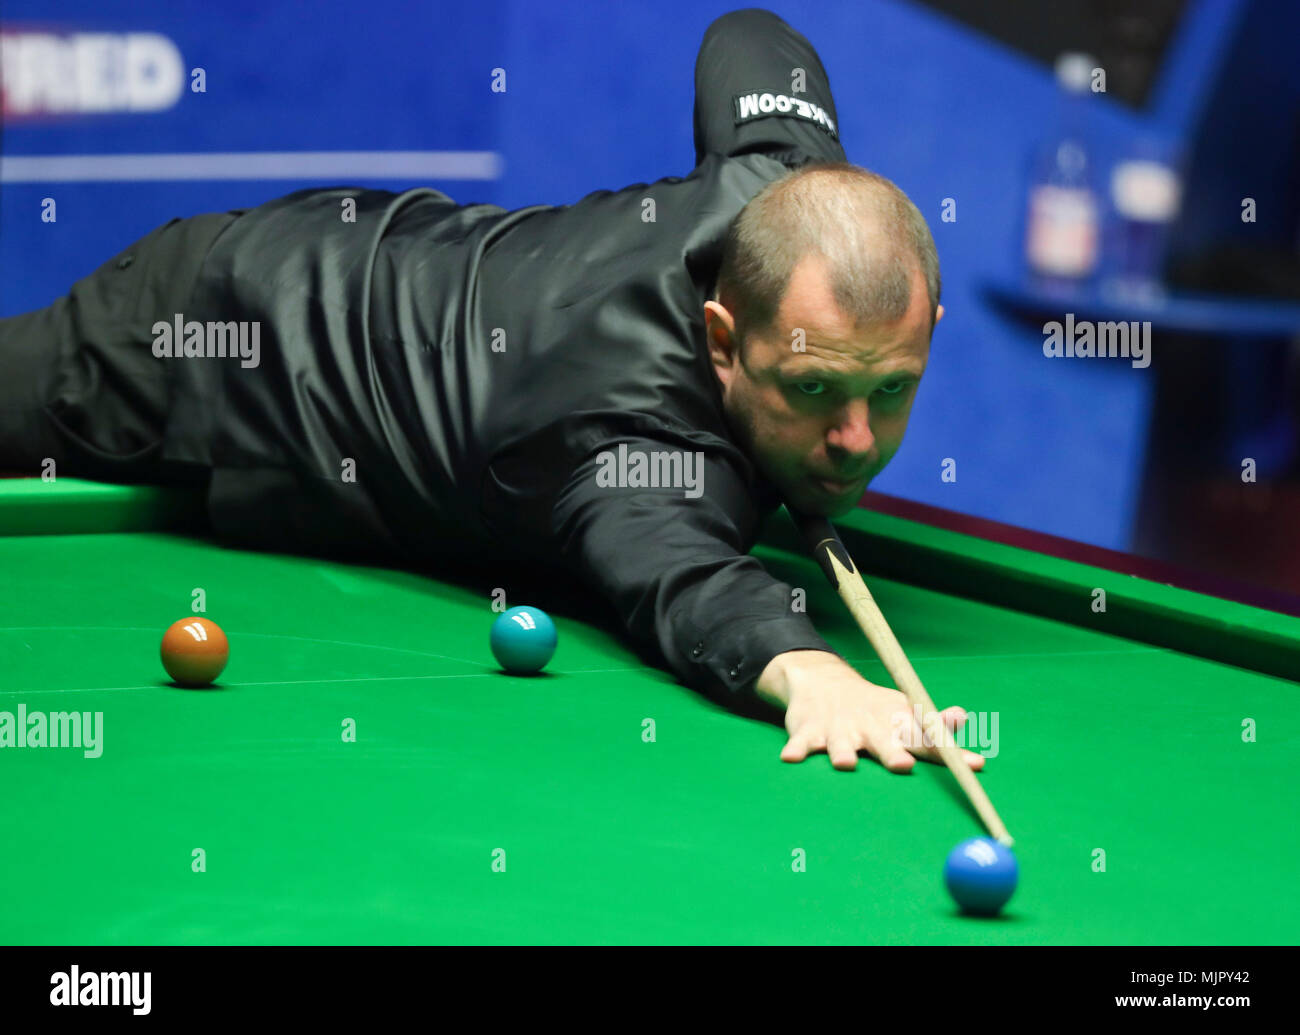 Sheffield, UK. 5th May, 2018. Barry Hawkins of England competes during the semifinal match against Mark Williams of Wales at the World Snooker Championship 2018 at the Crucible Theatre in Sheffield, UK, on May 5, 2018. Credit: Han Yan/Xinhua/Alamy Live News Stock Photo